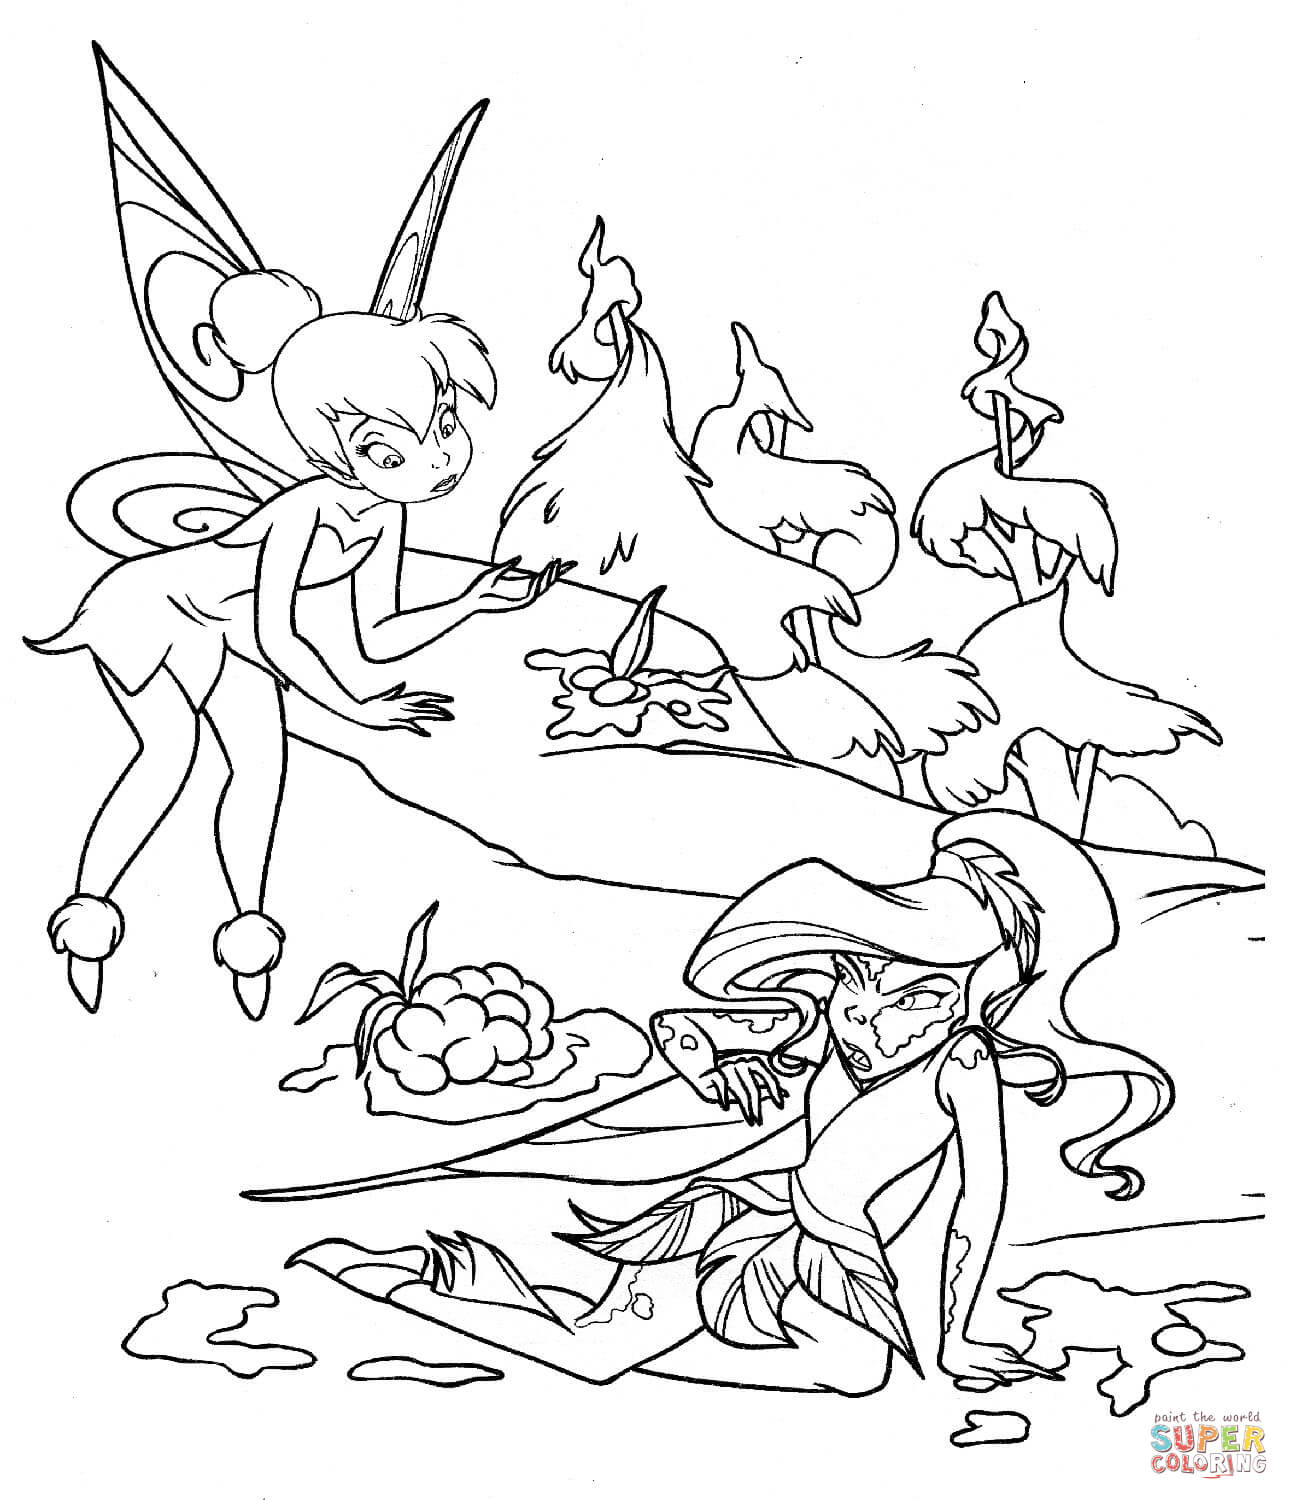 Fairy in mud coloring page | Free Printable Coloring Pages